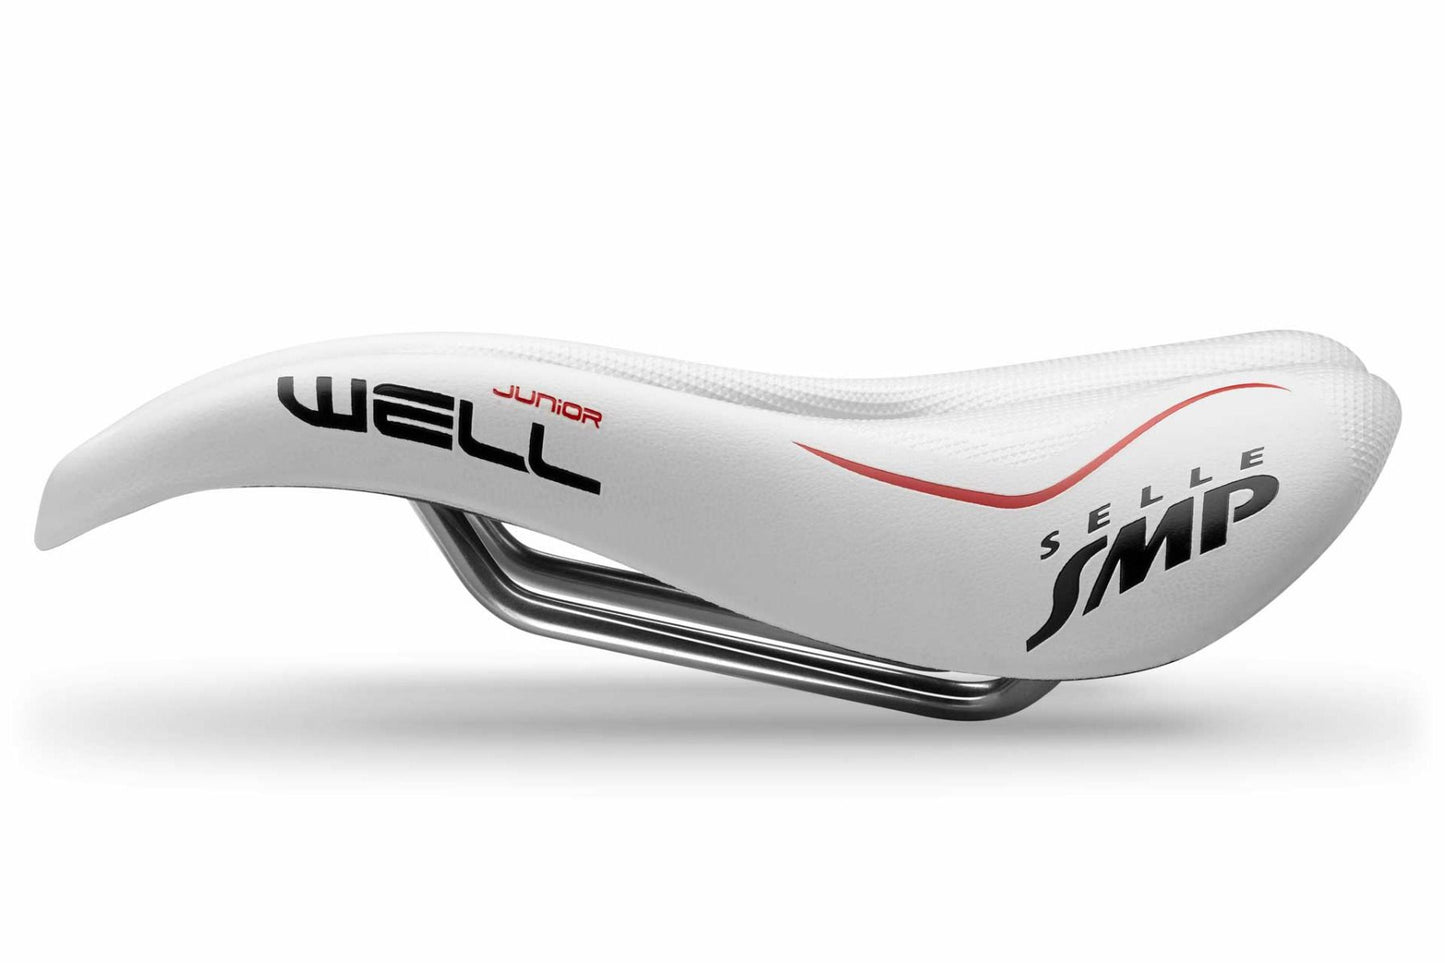 Selle SMP Well Junior Saddle (White)